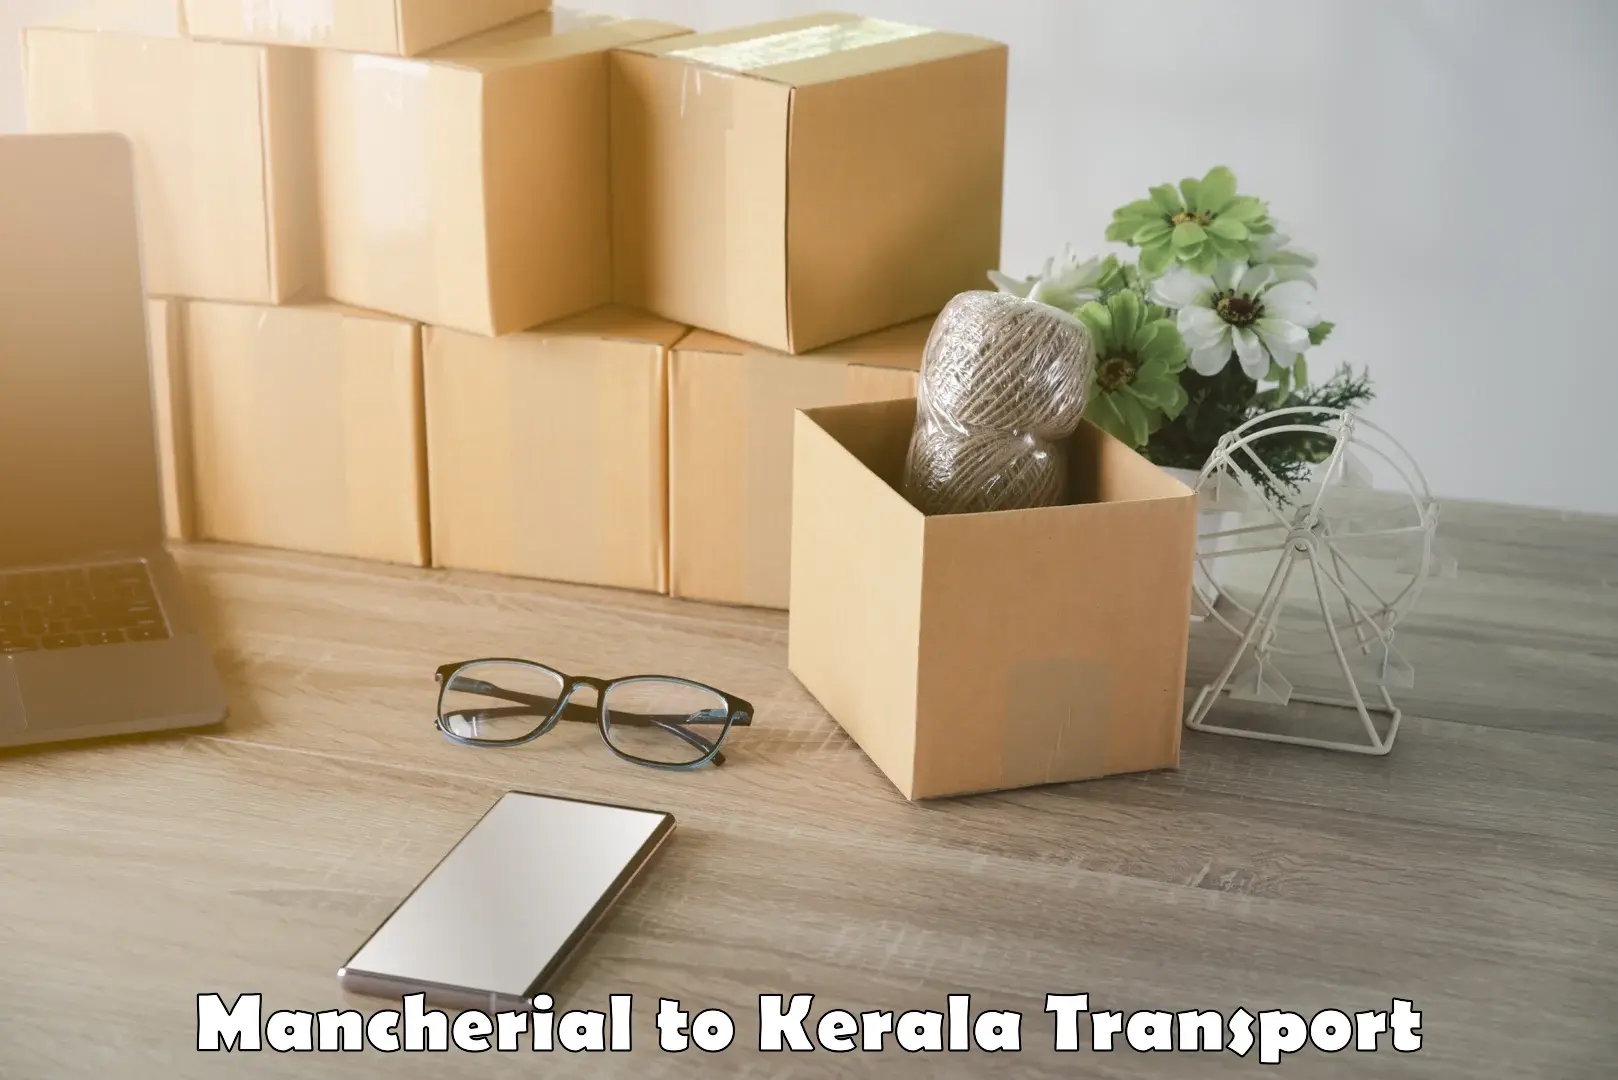 Vehicle transport services Mancherial to Kerala